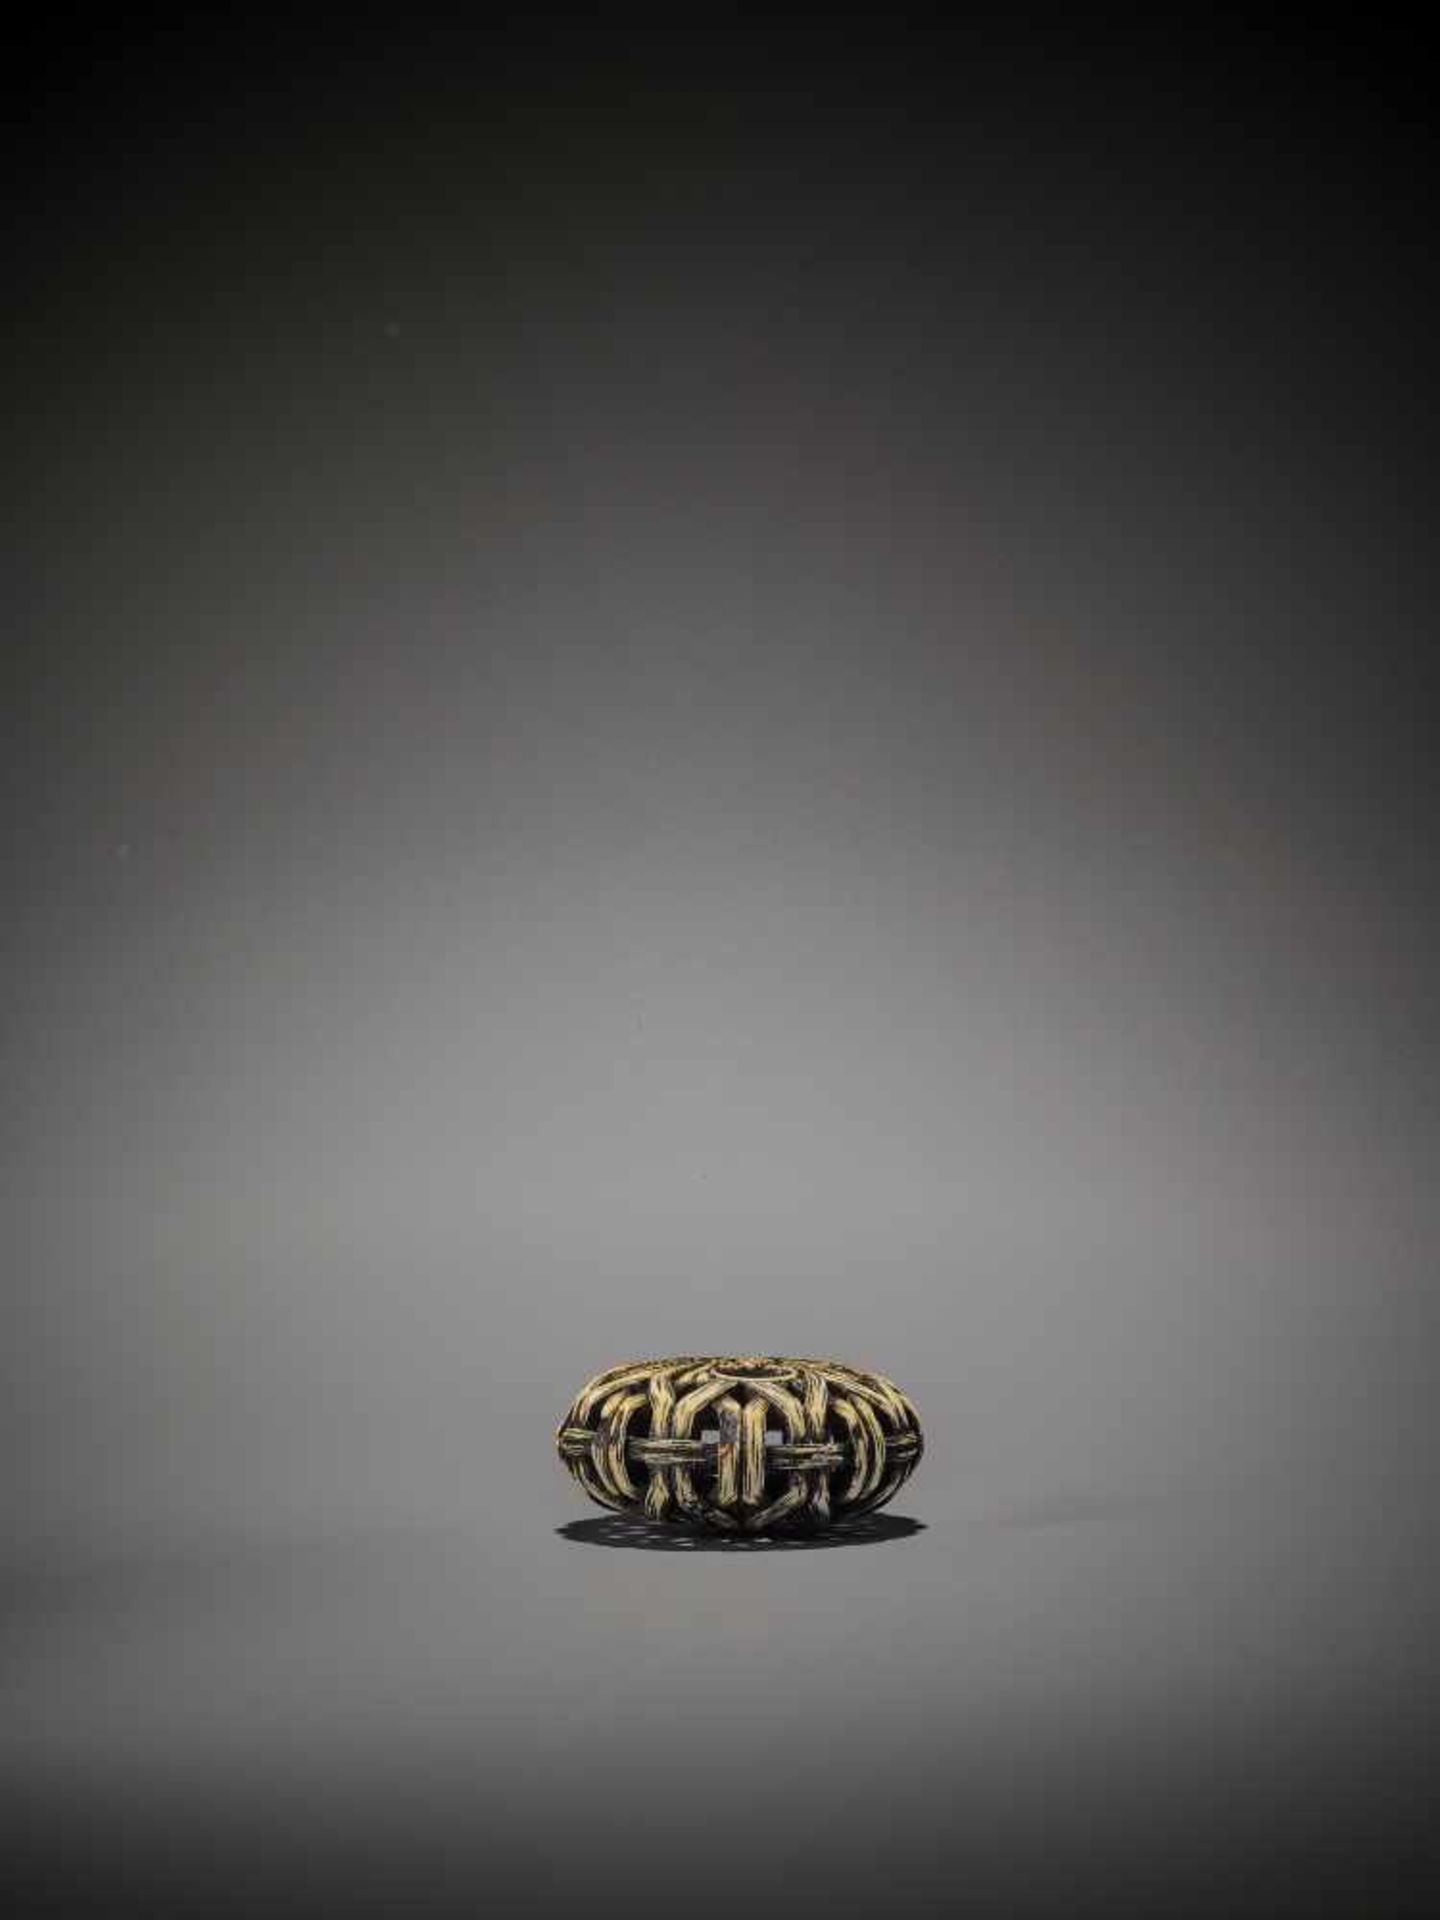 A BRILLIANT STAG ANTLER RYUSA MANJU NETSUKE WITH FLOWERS AND WEAVE UnsignedJapan, Tokyo, Asakusa, - Image 12 of 12